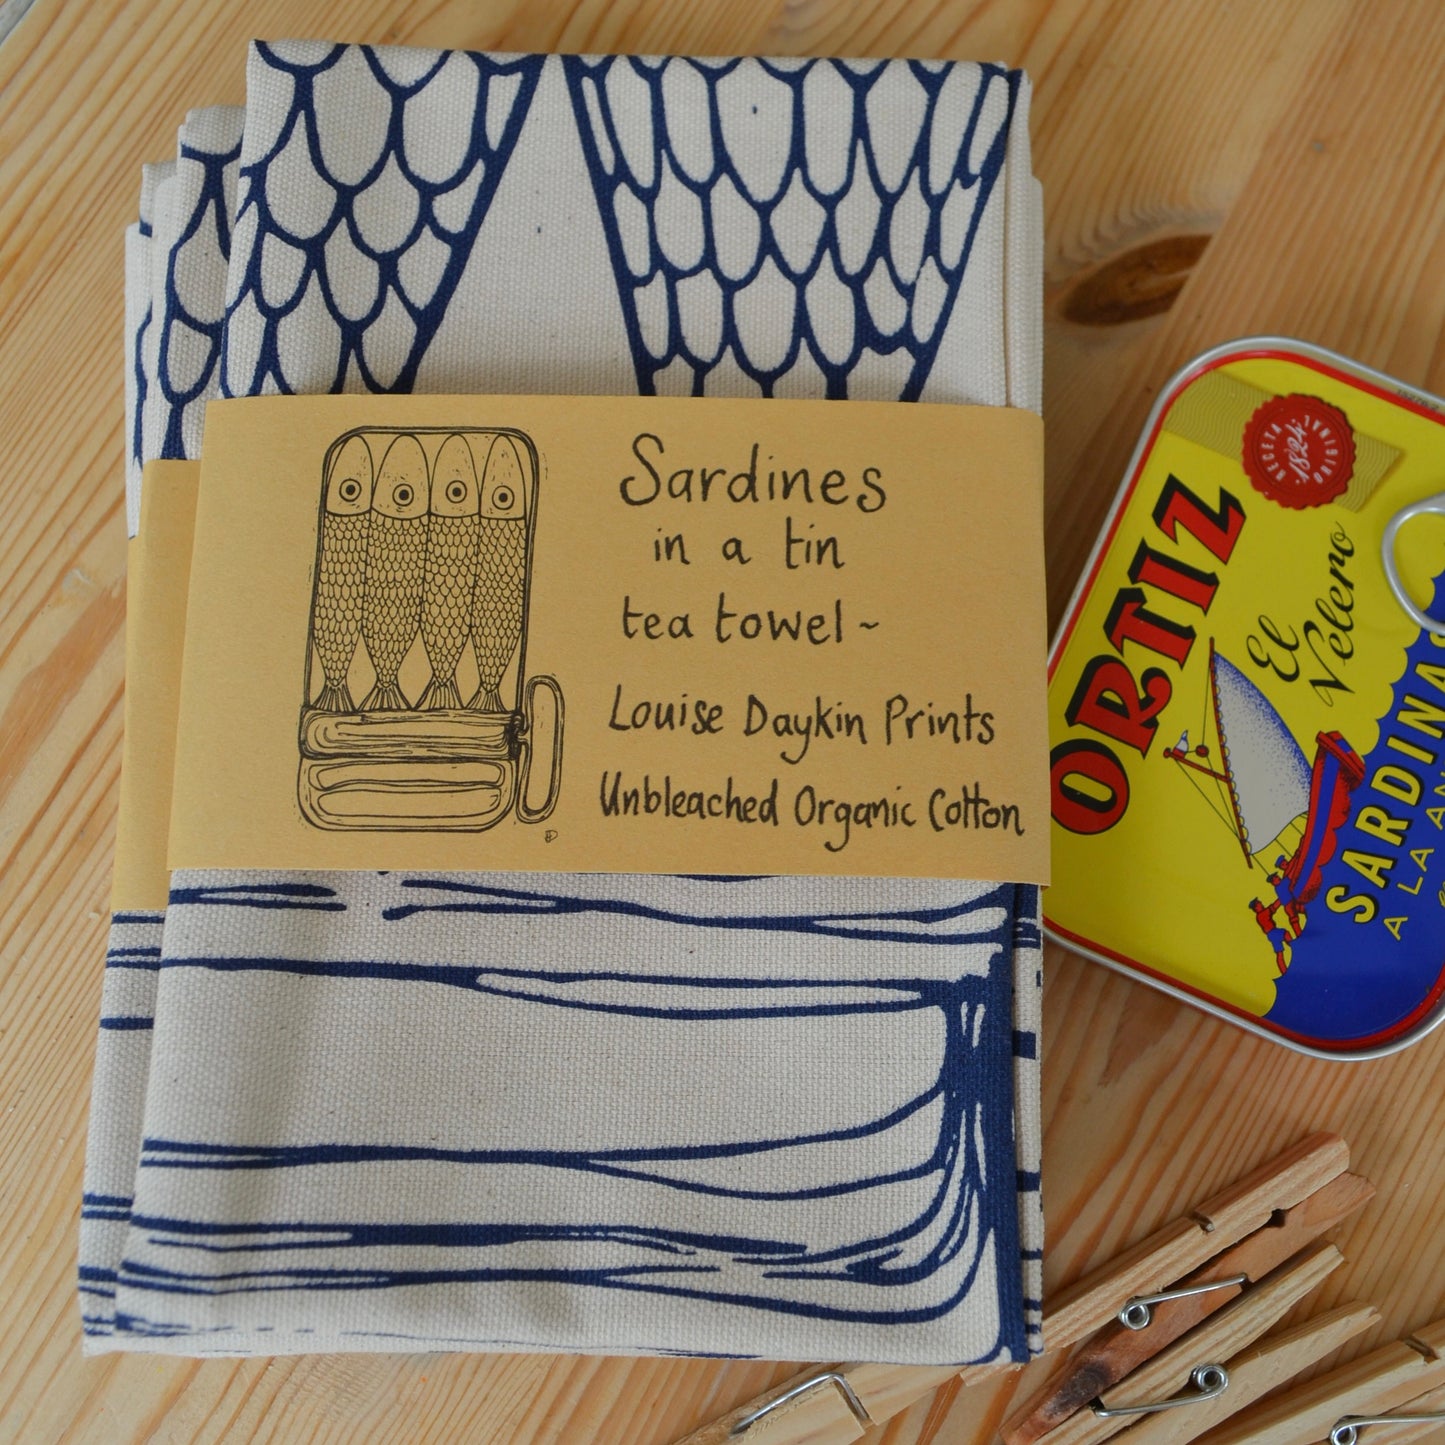 "Sardines in a tin" Tea towel comes is wrapped in an attractive brown paper band featuring a picture of the design